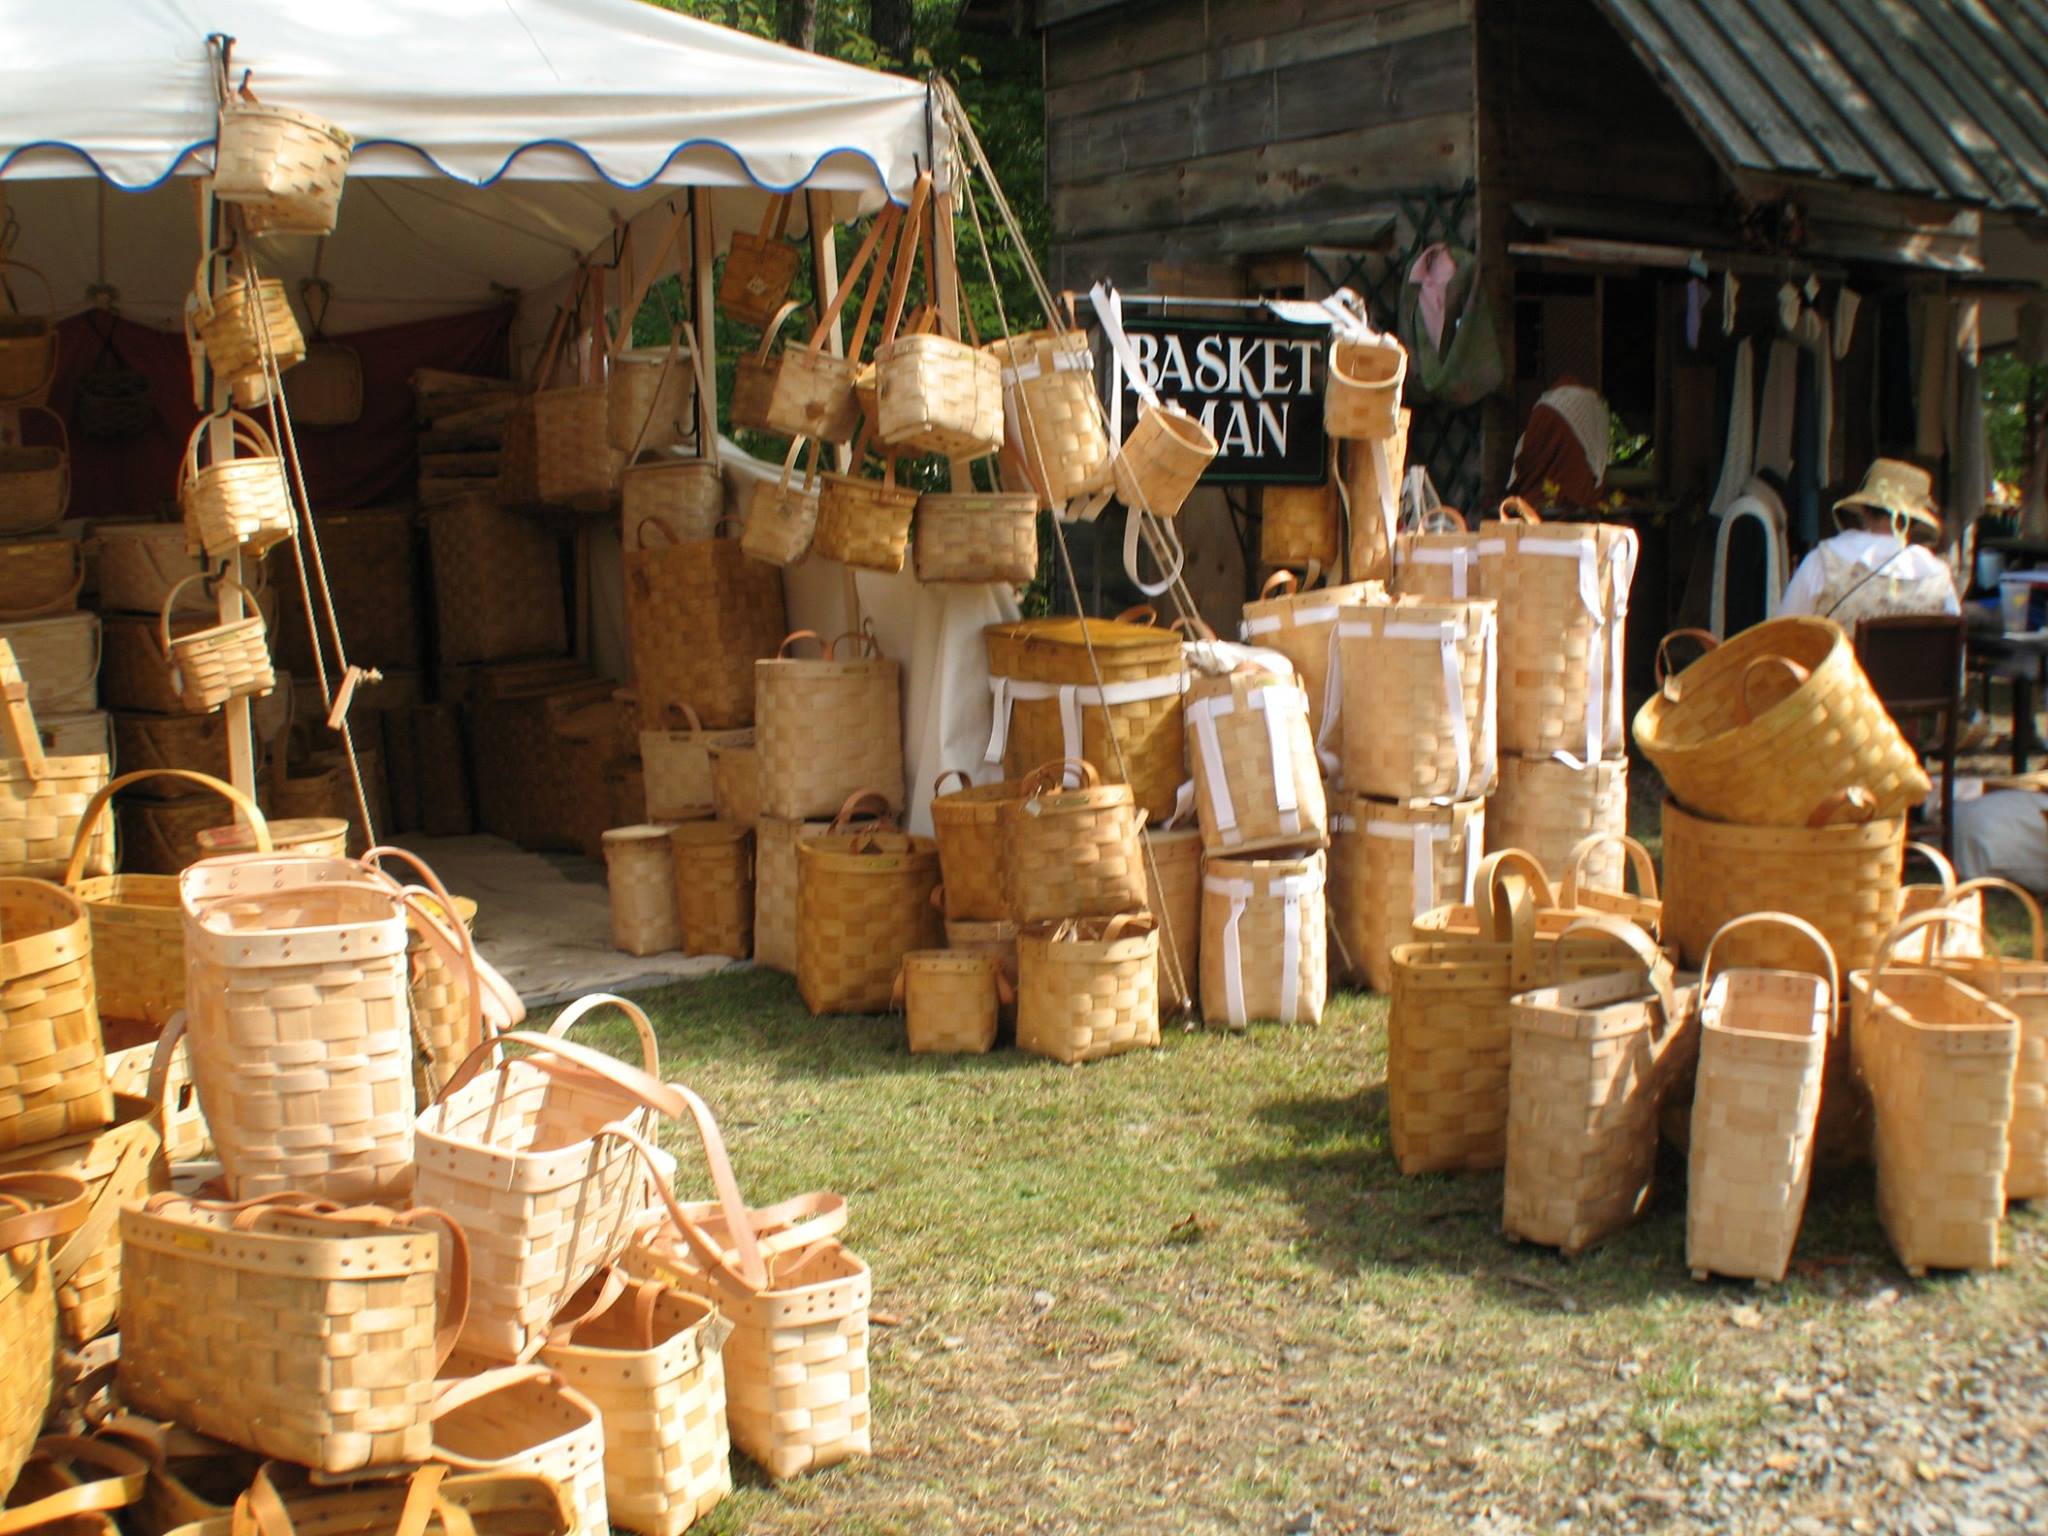 Local Baskets at Penns Colony Festival